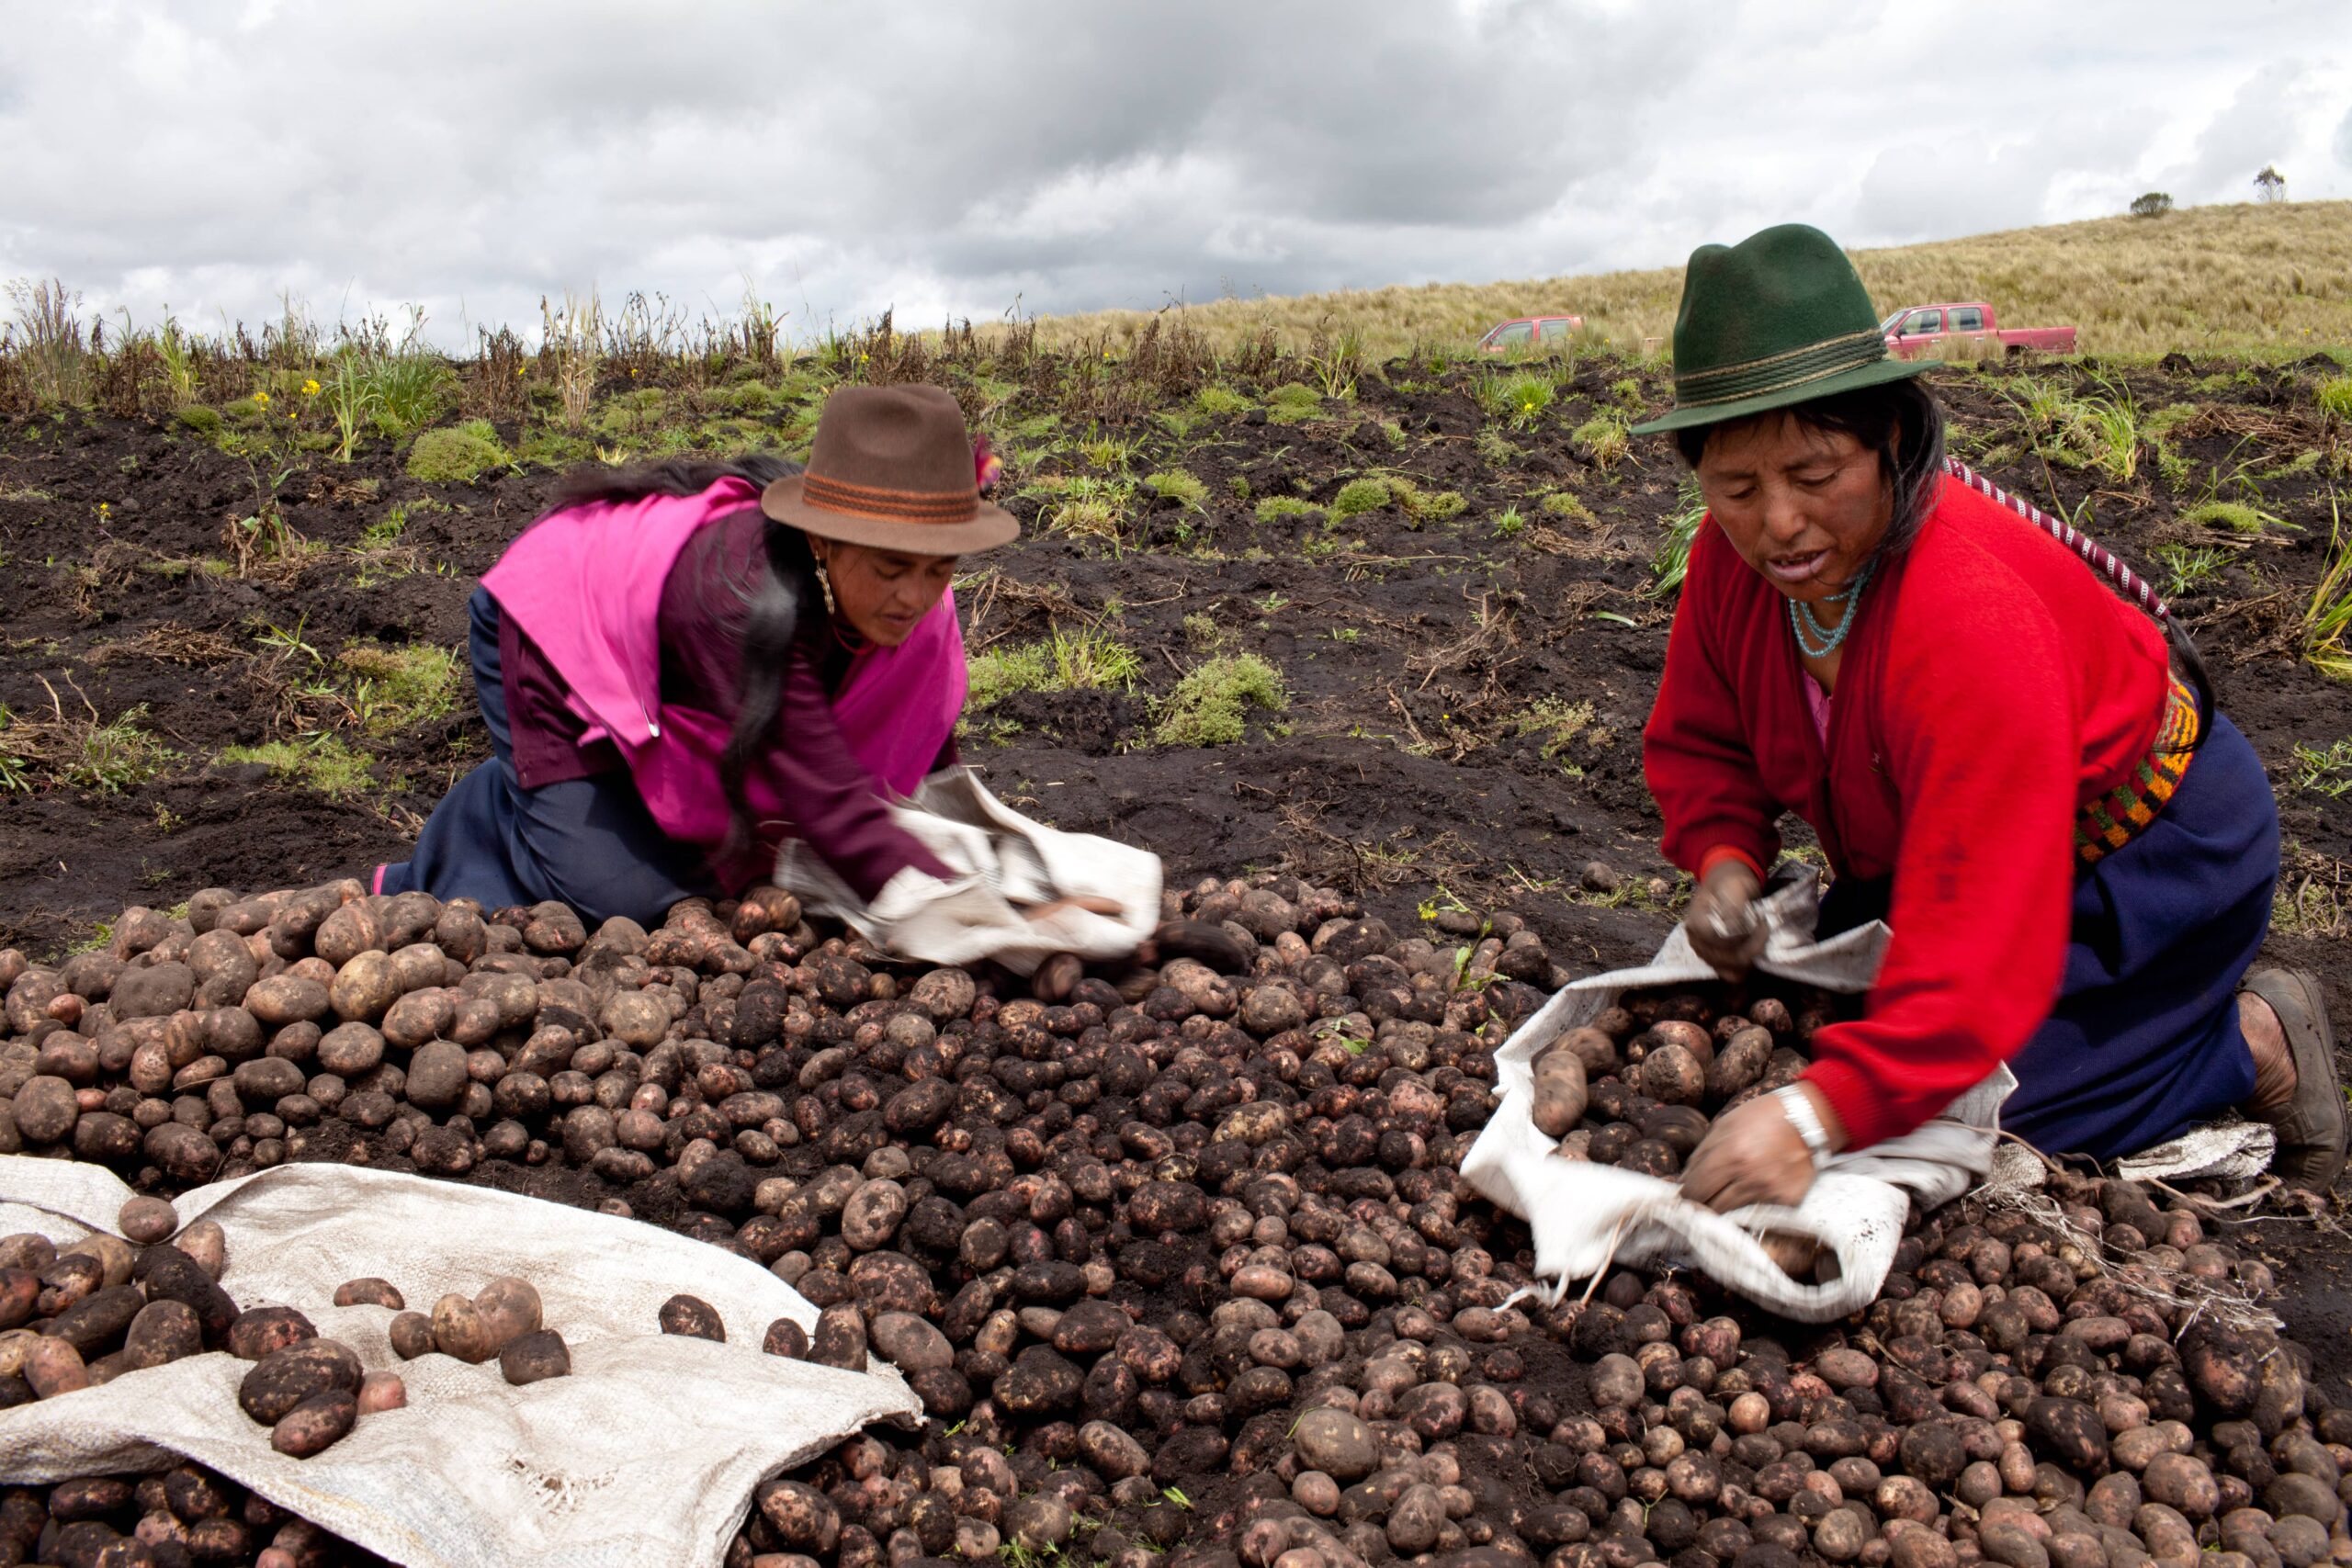 Scaling agroecology in Ecuador